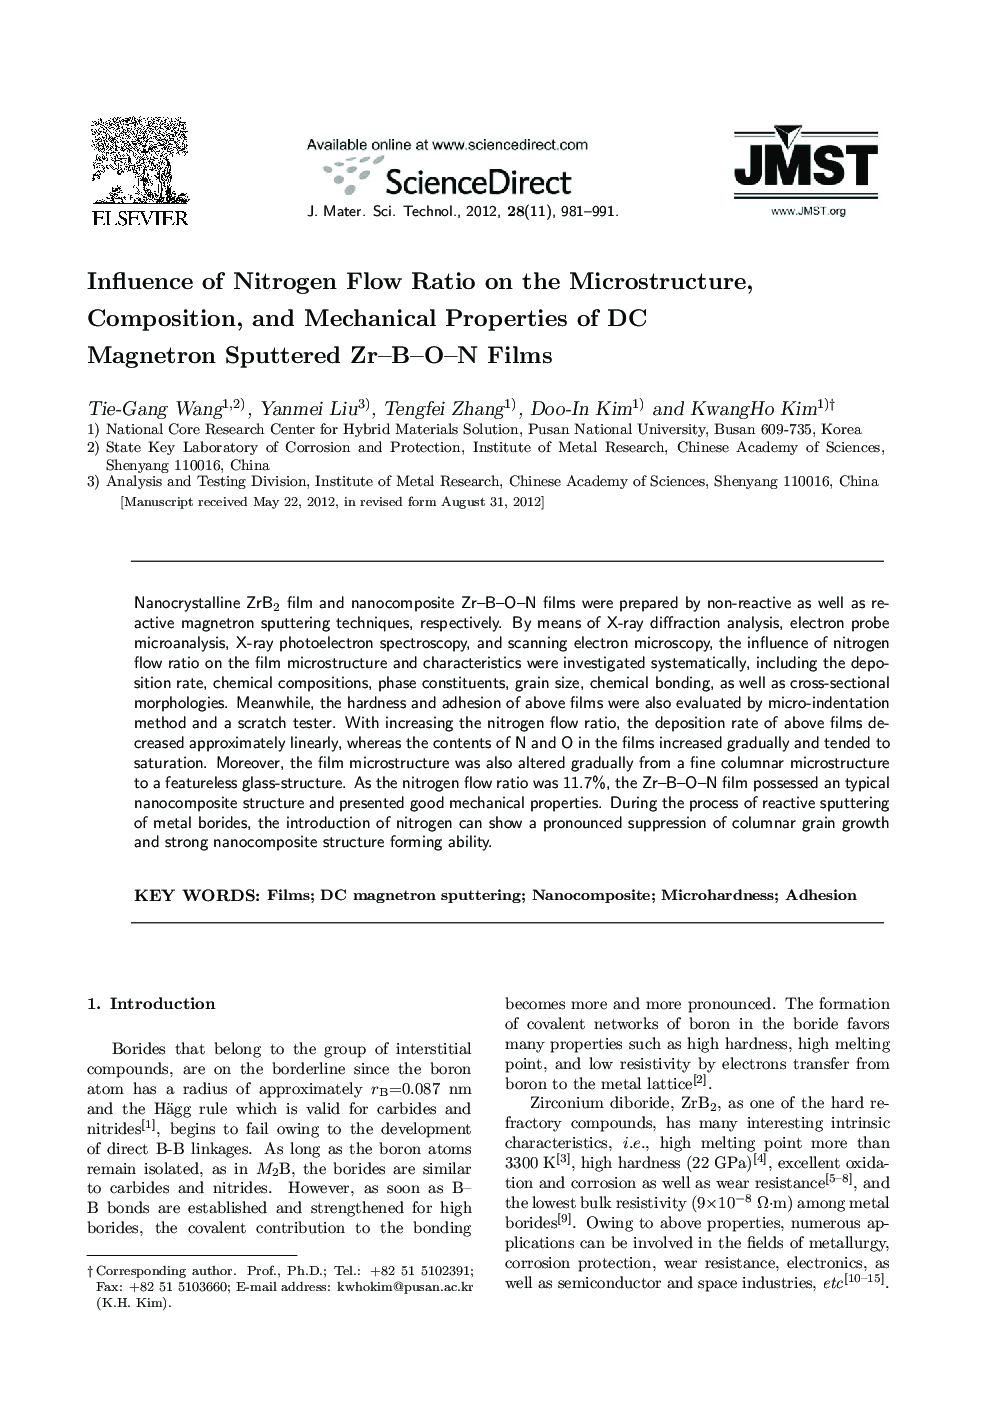 Influence of Nitrogen Flow Ratio on the Microstructure, Composition, and Mechanical Properties of DC Magnetron Sputtered Zr–B–O–N Films